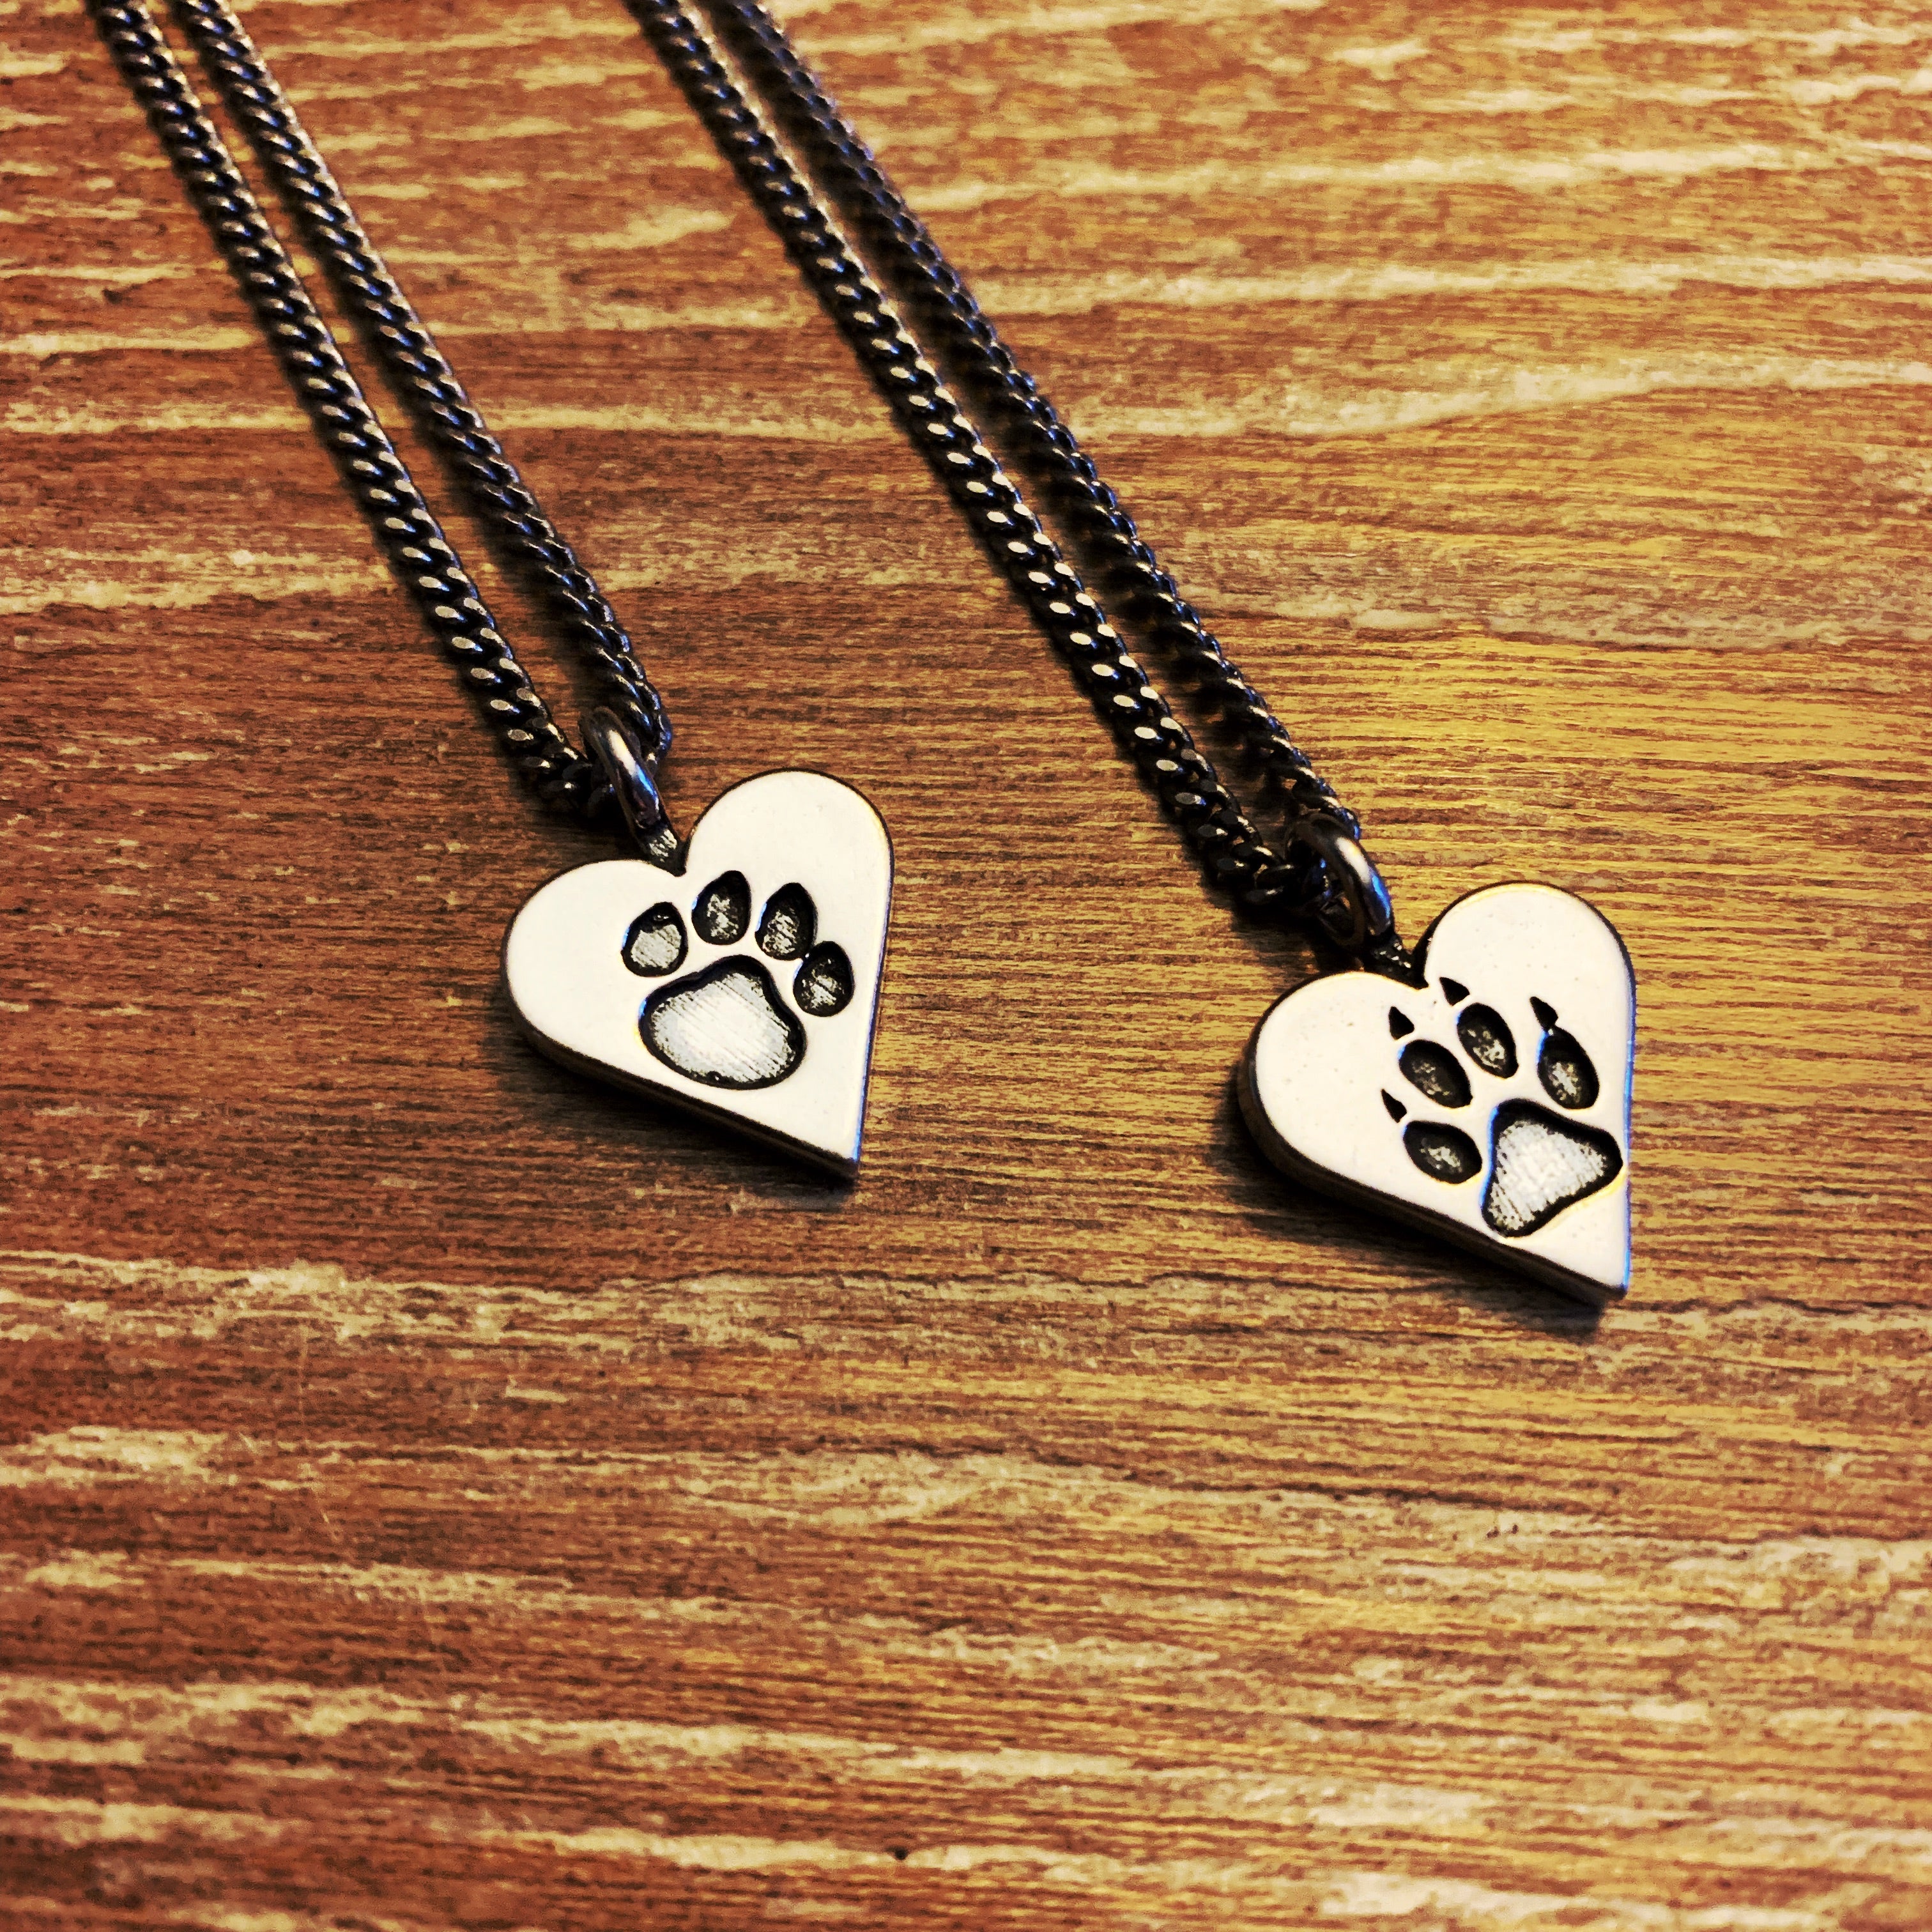 Dog Lover or Cat Lover Necklace - Sterling Silver Choker Mini